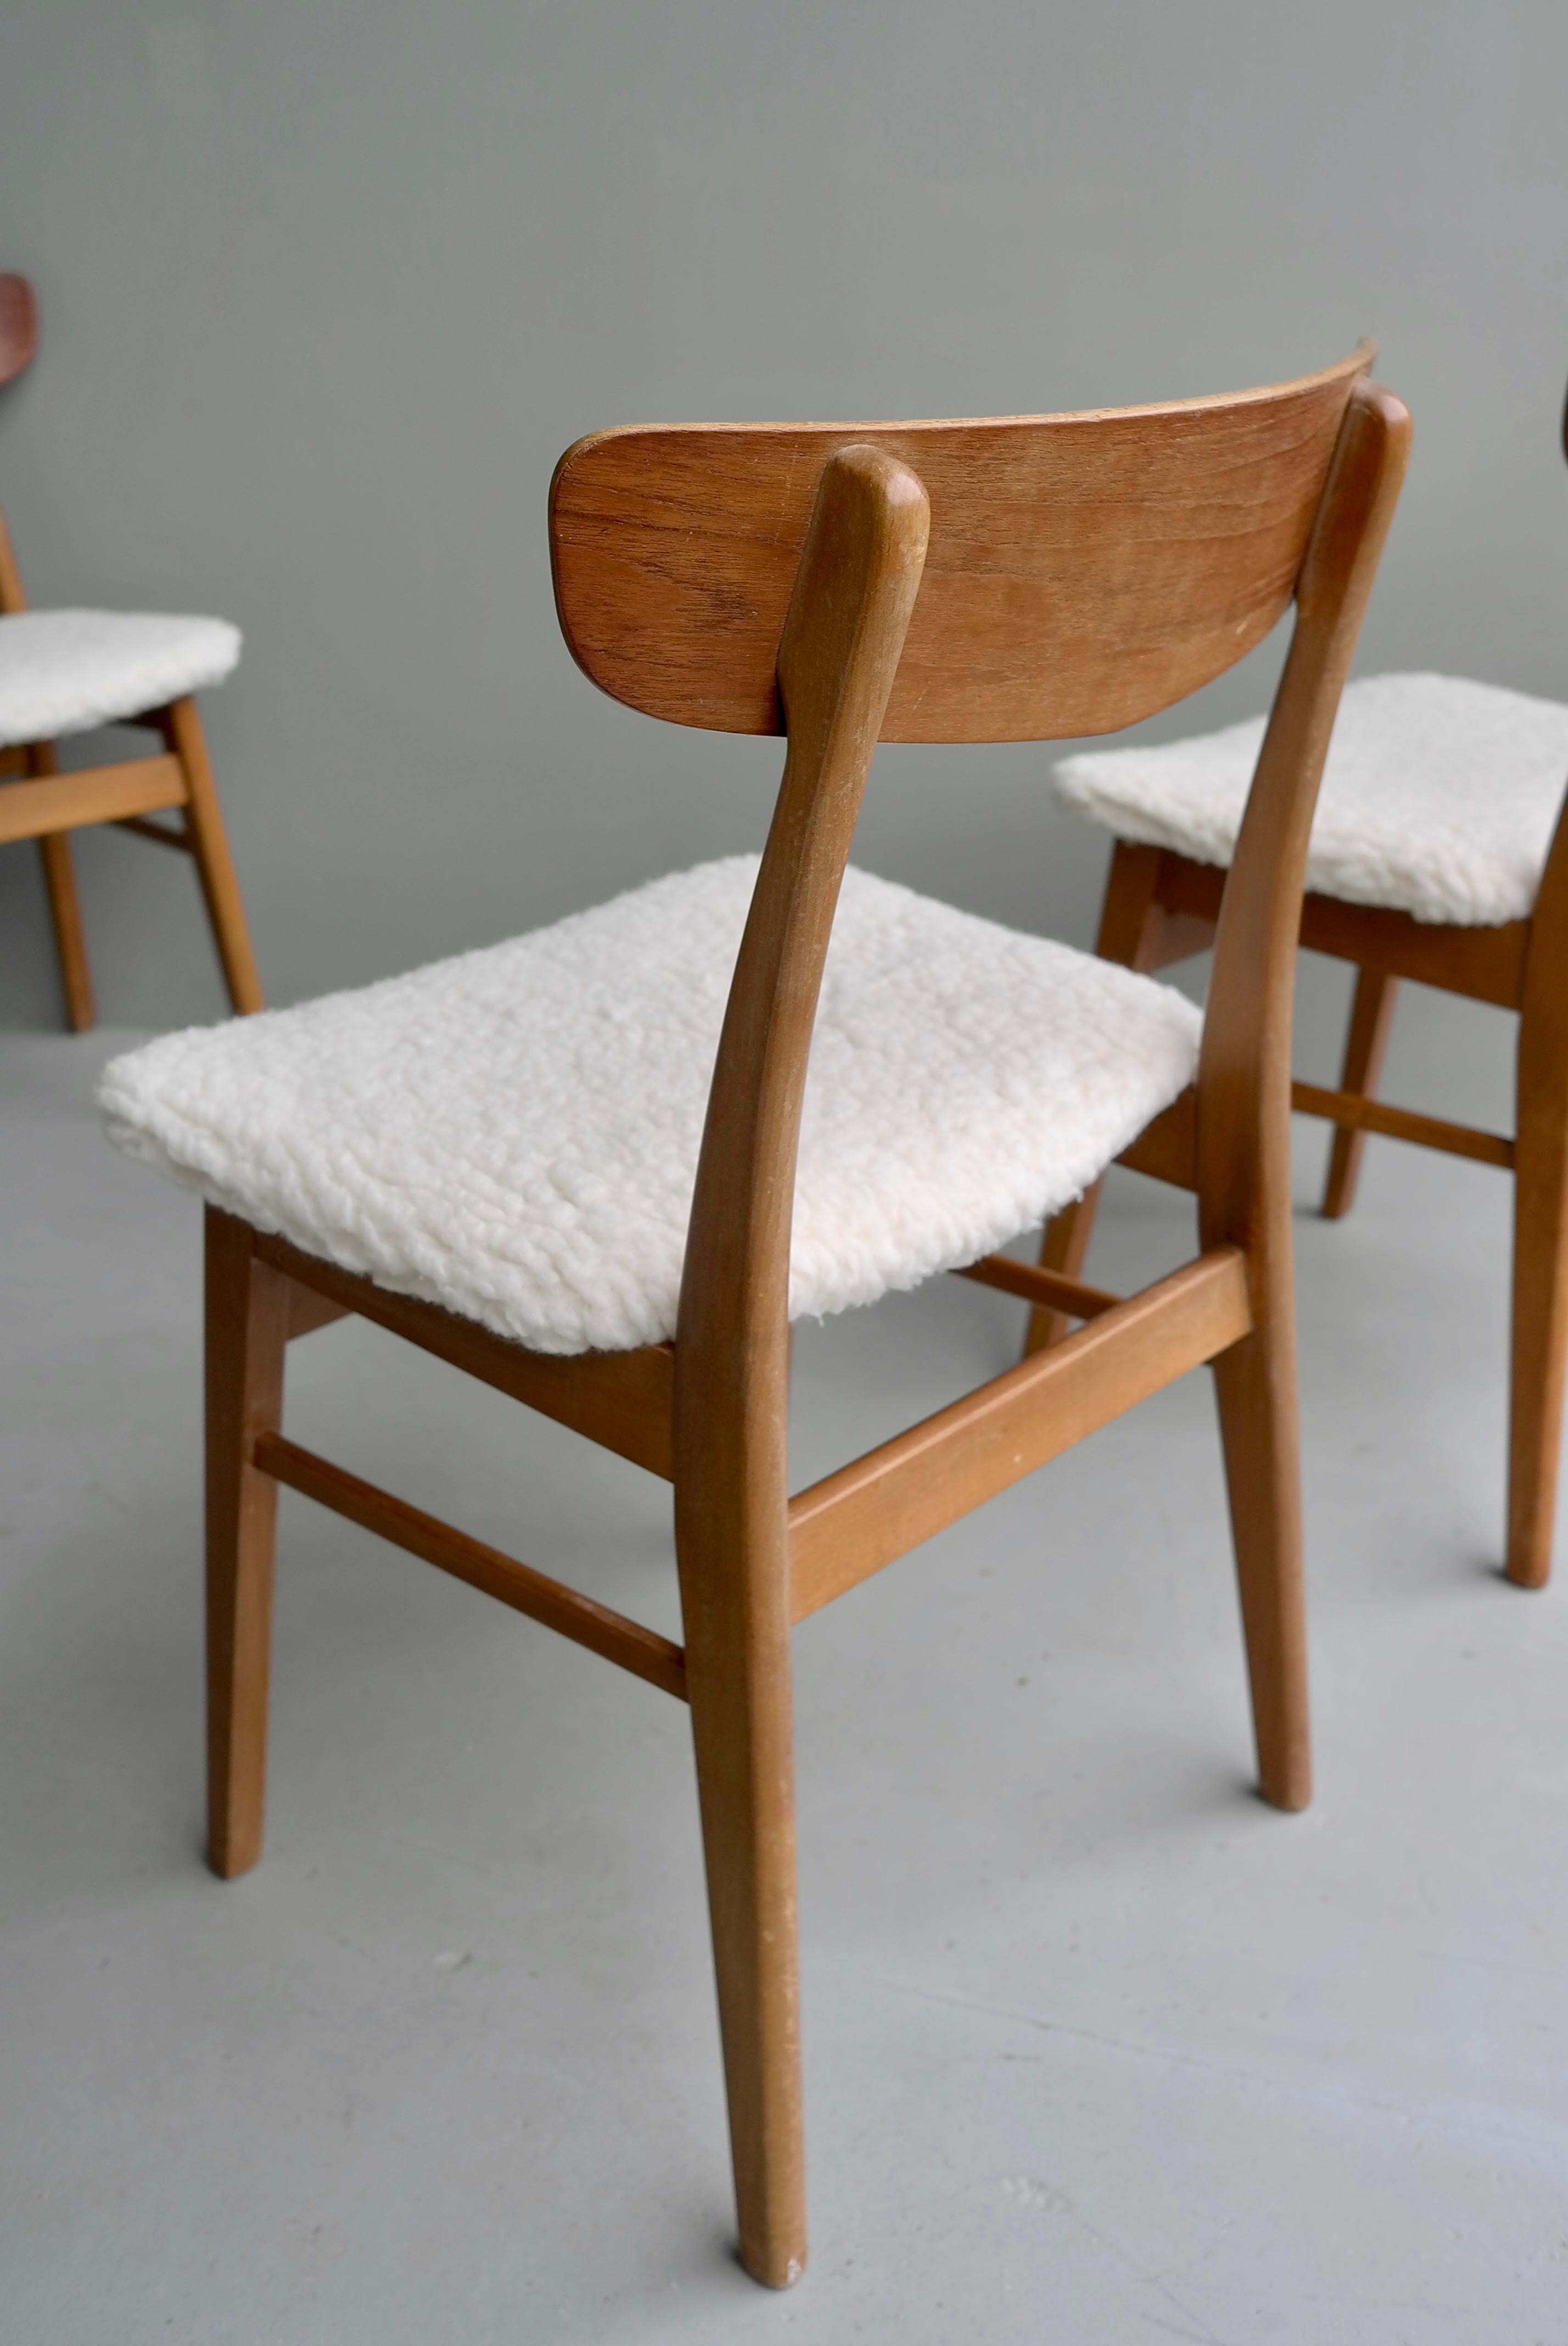 Six Teak Danish Heart Chairs with Seats in Pure Merino Wool, by Farstrup Møbler 2